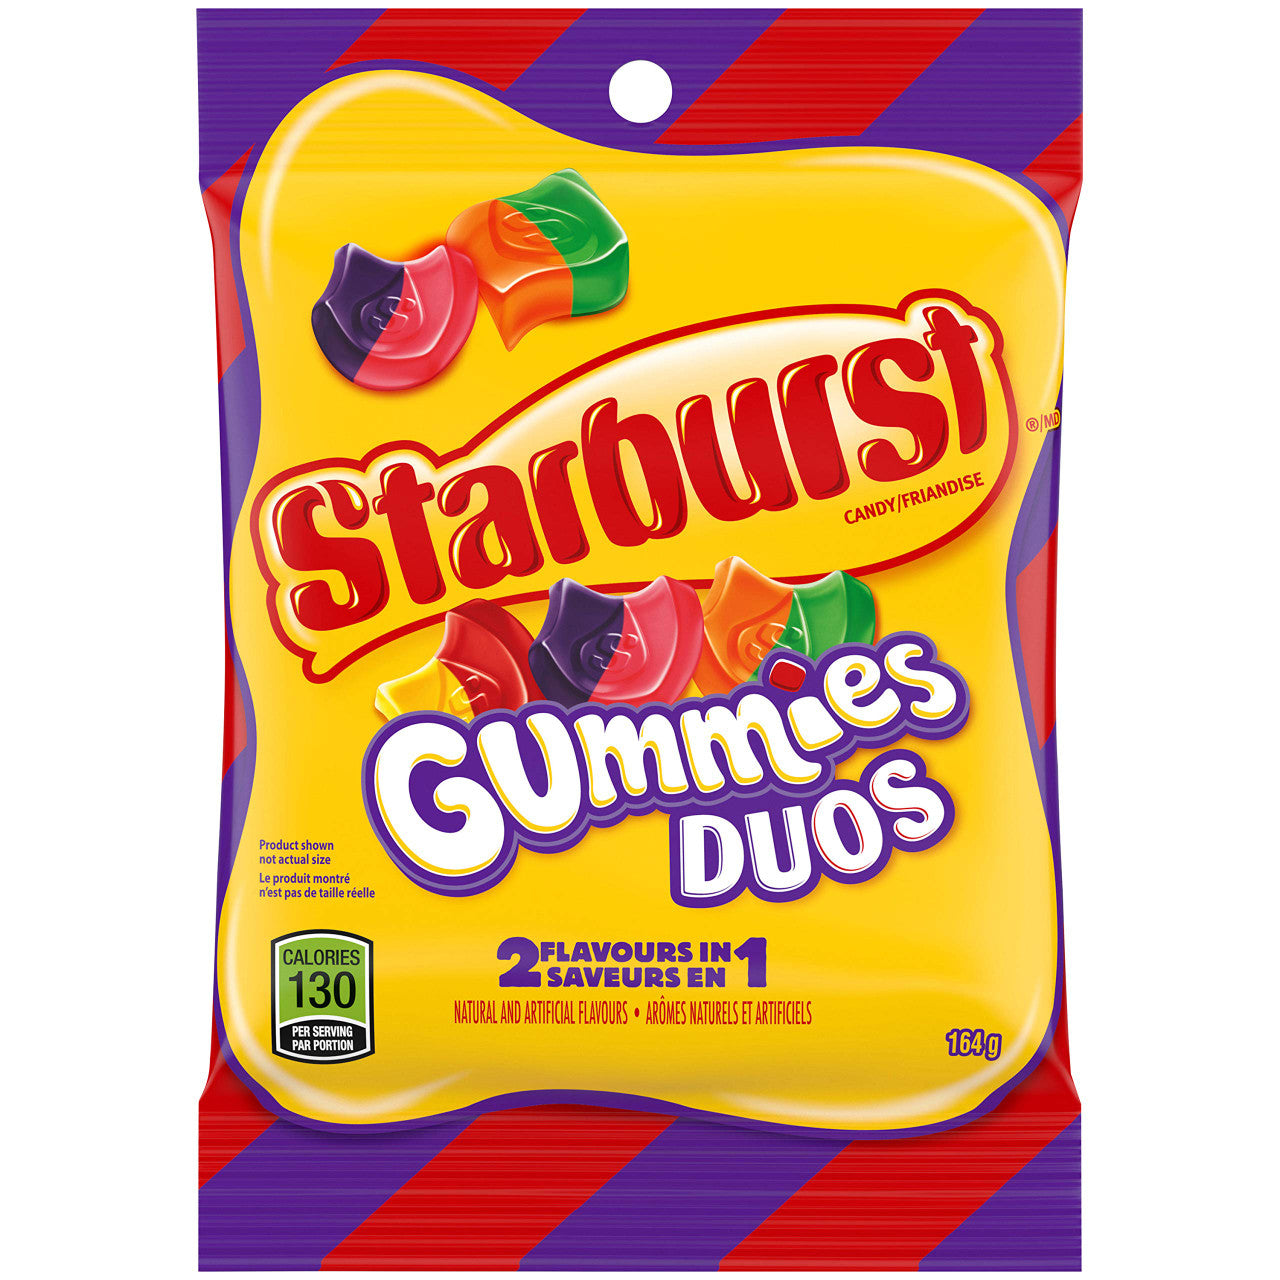 Starburst Duos Gummies Candies, Fruit Flavoured, Bag,164g/5.8oz, (Imported from Canada)